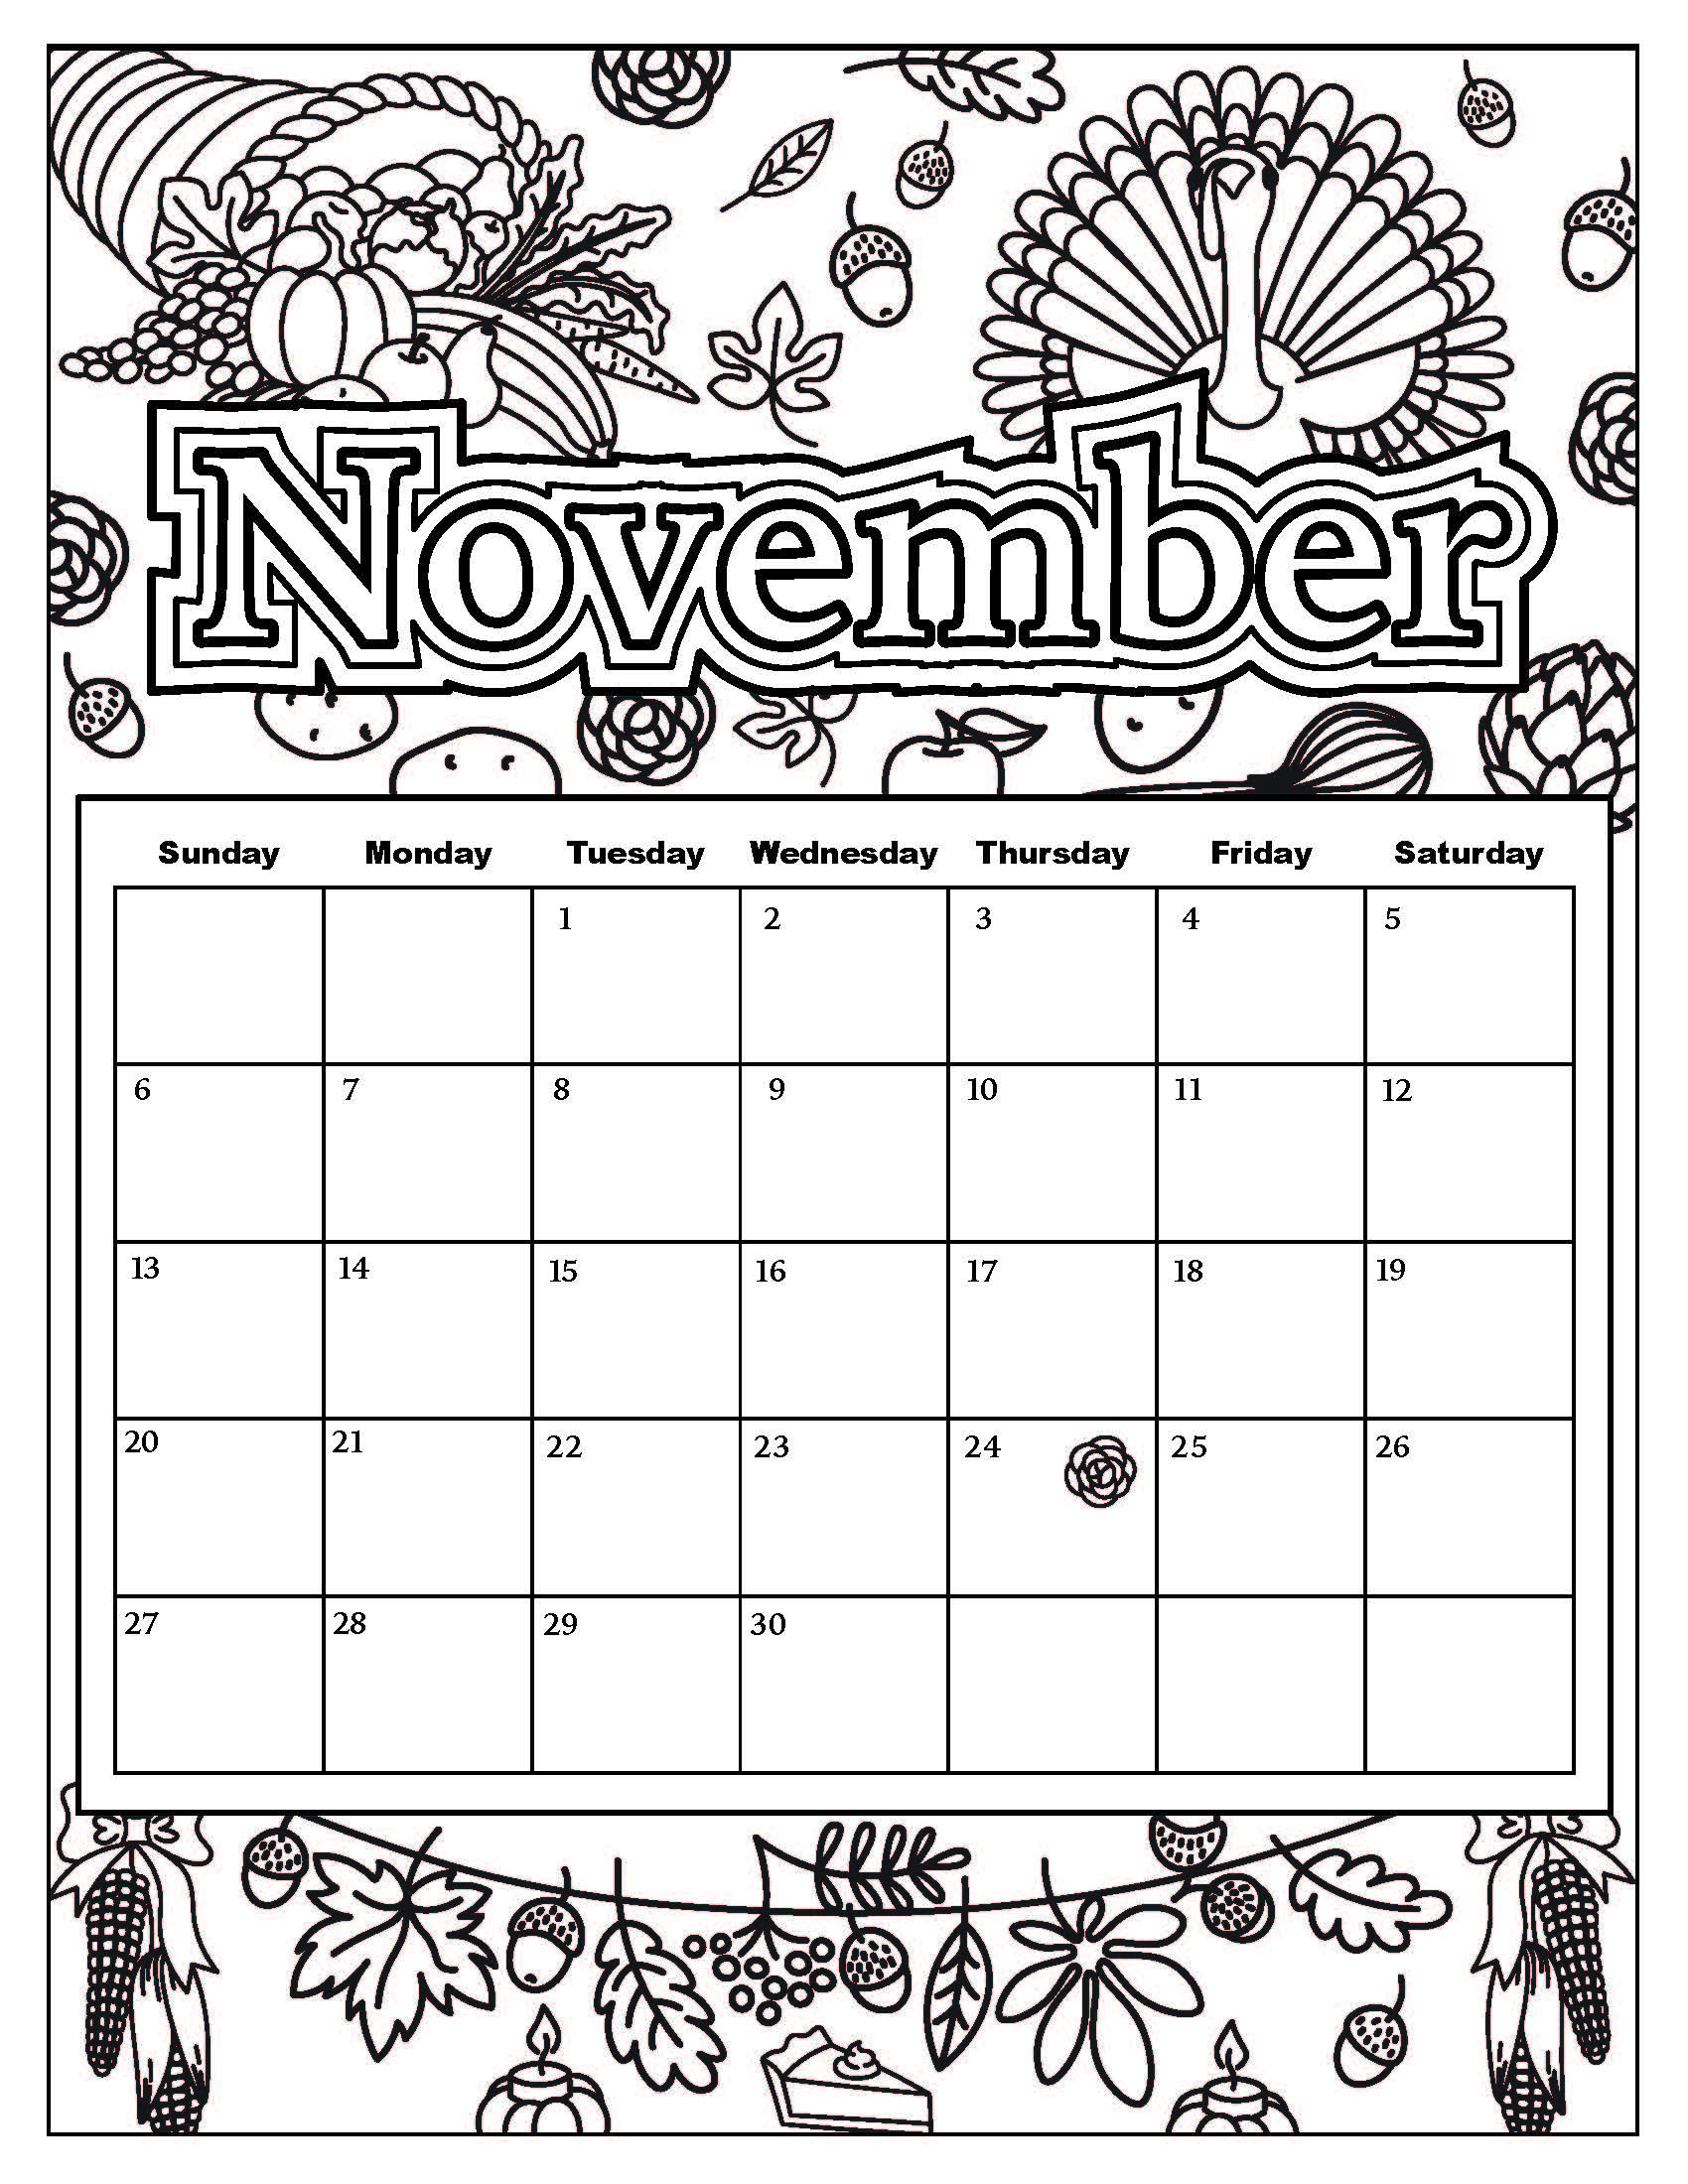 November Coloring Pages Printable
 Free Download Coloring Pages from Popular Adult Coloring